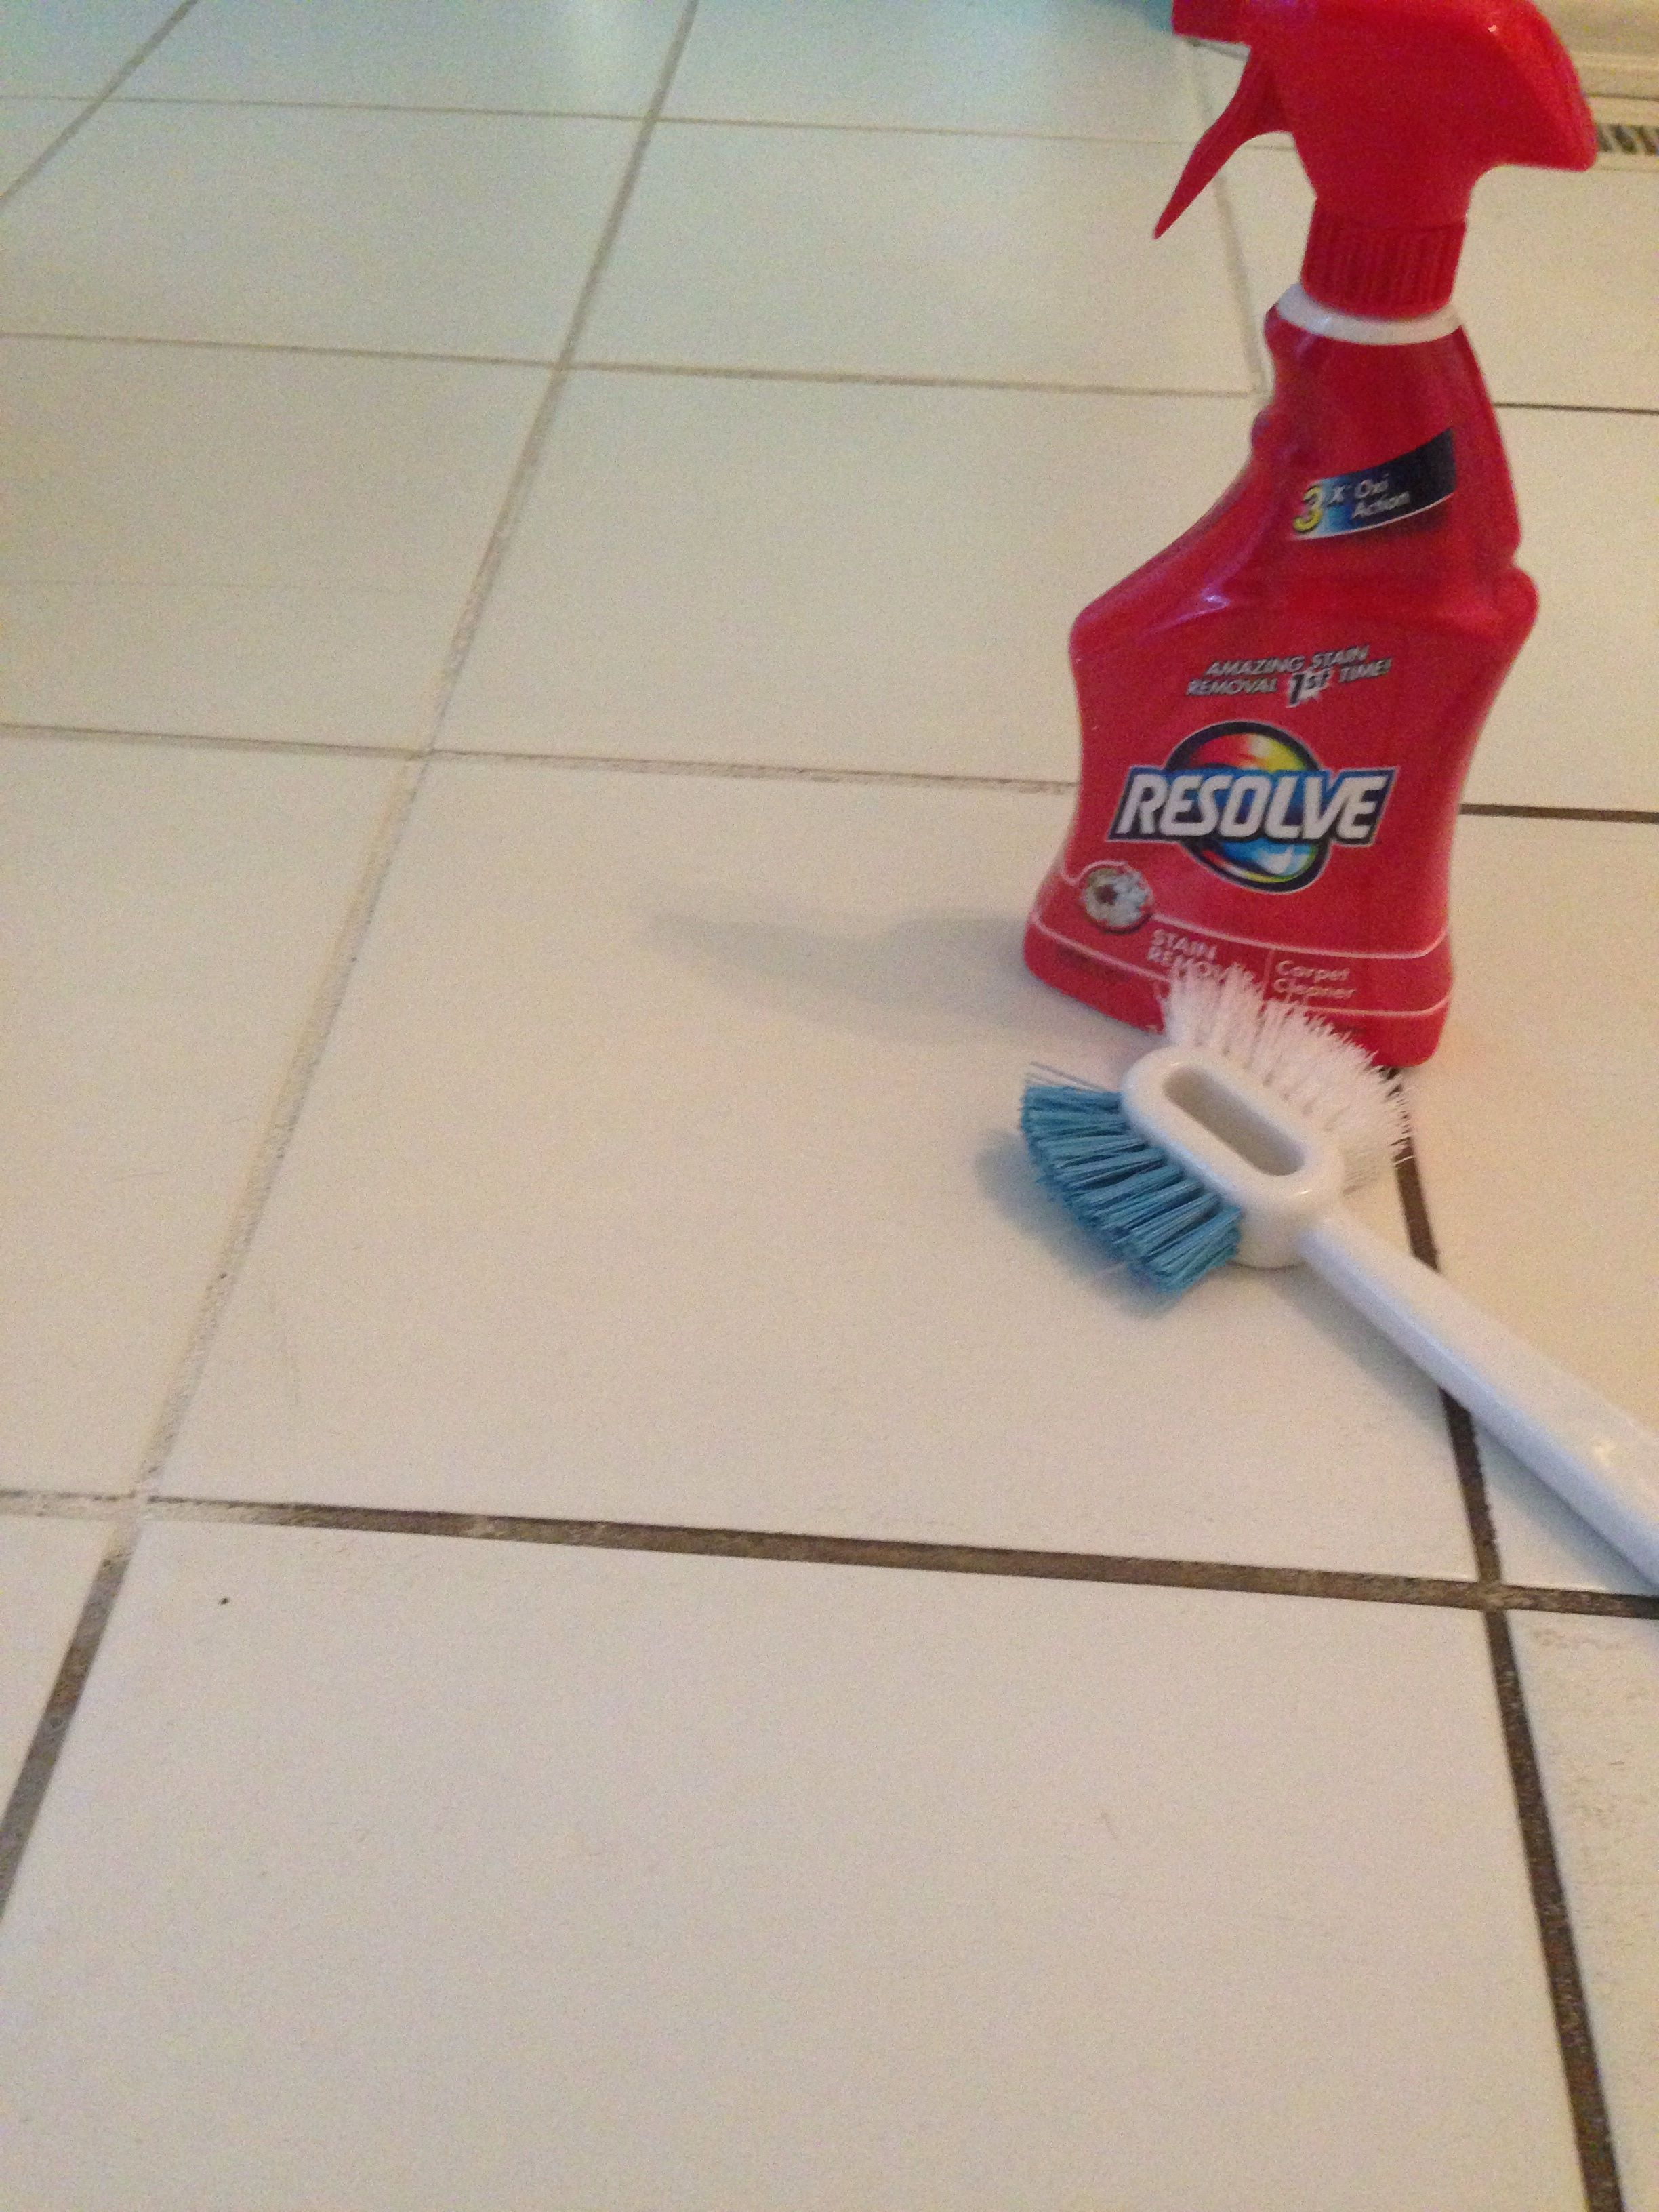 Resolve Carpet Cleaner To Clean Grout Cleaning Hacks regarding measurements 2448 X 3264